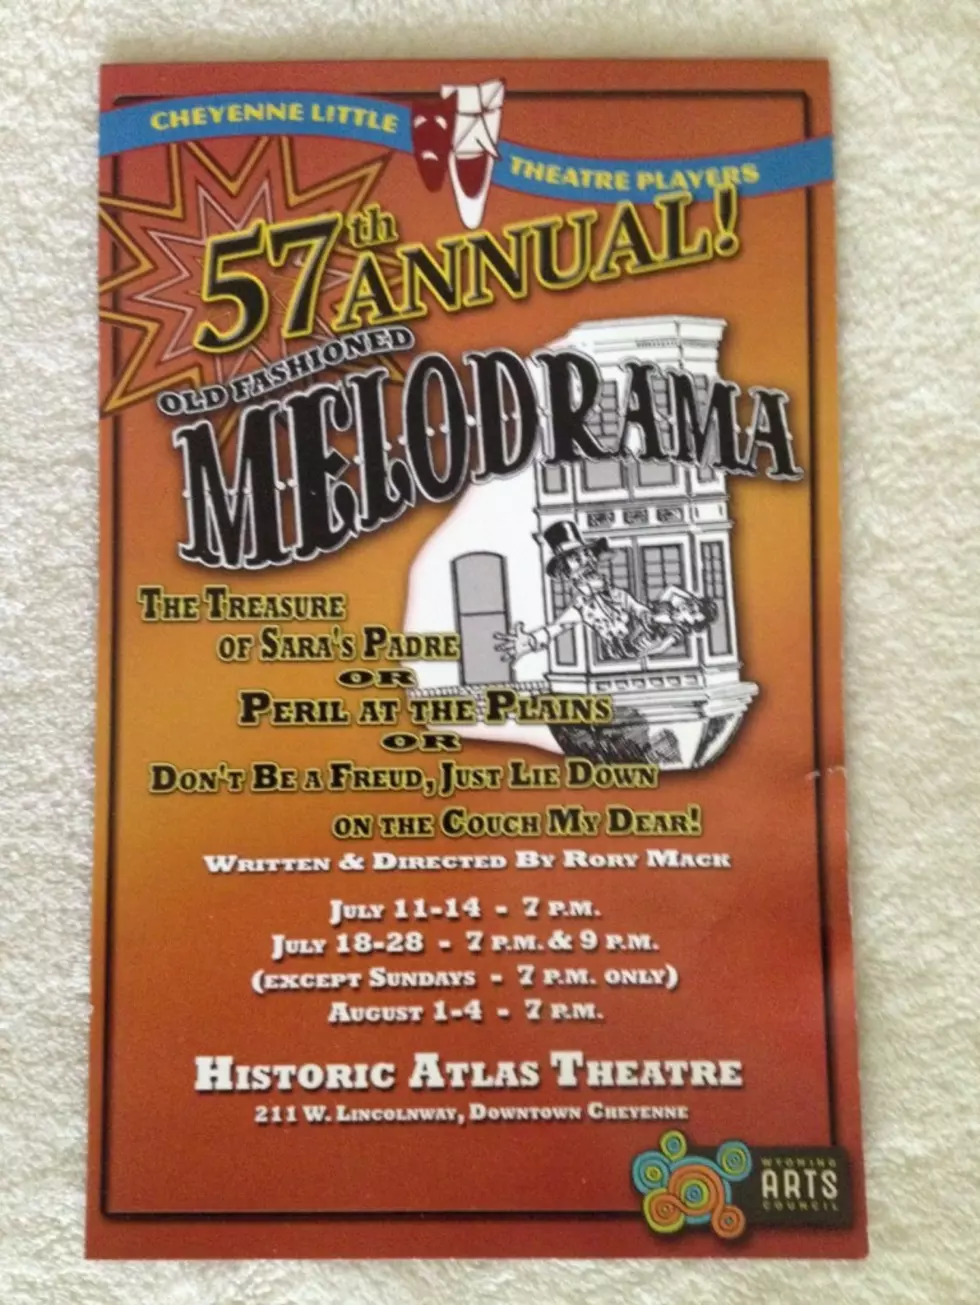 Old-Fashioned Melodrama&#8217;s 57th Season Continues at Historic Atlas Theatre